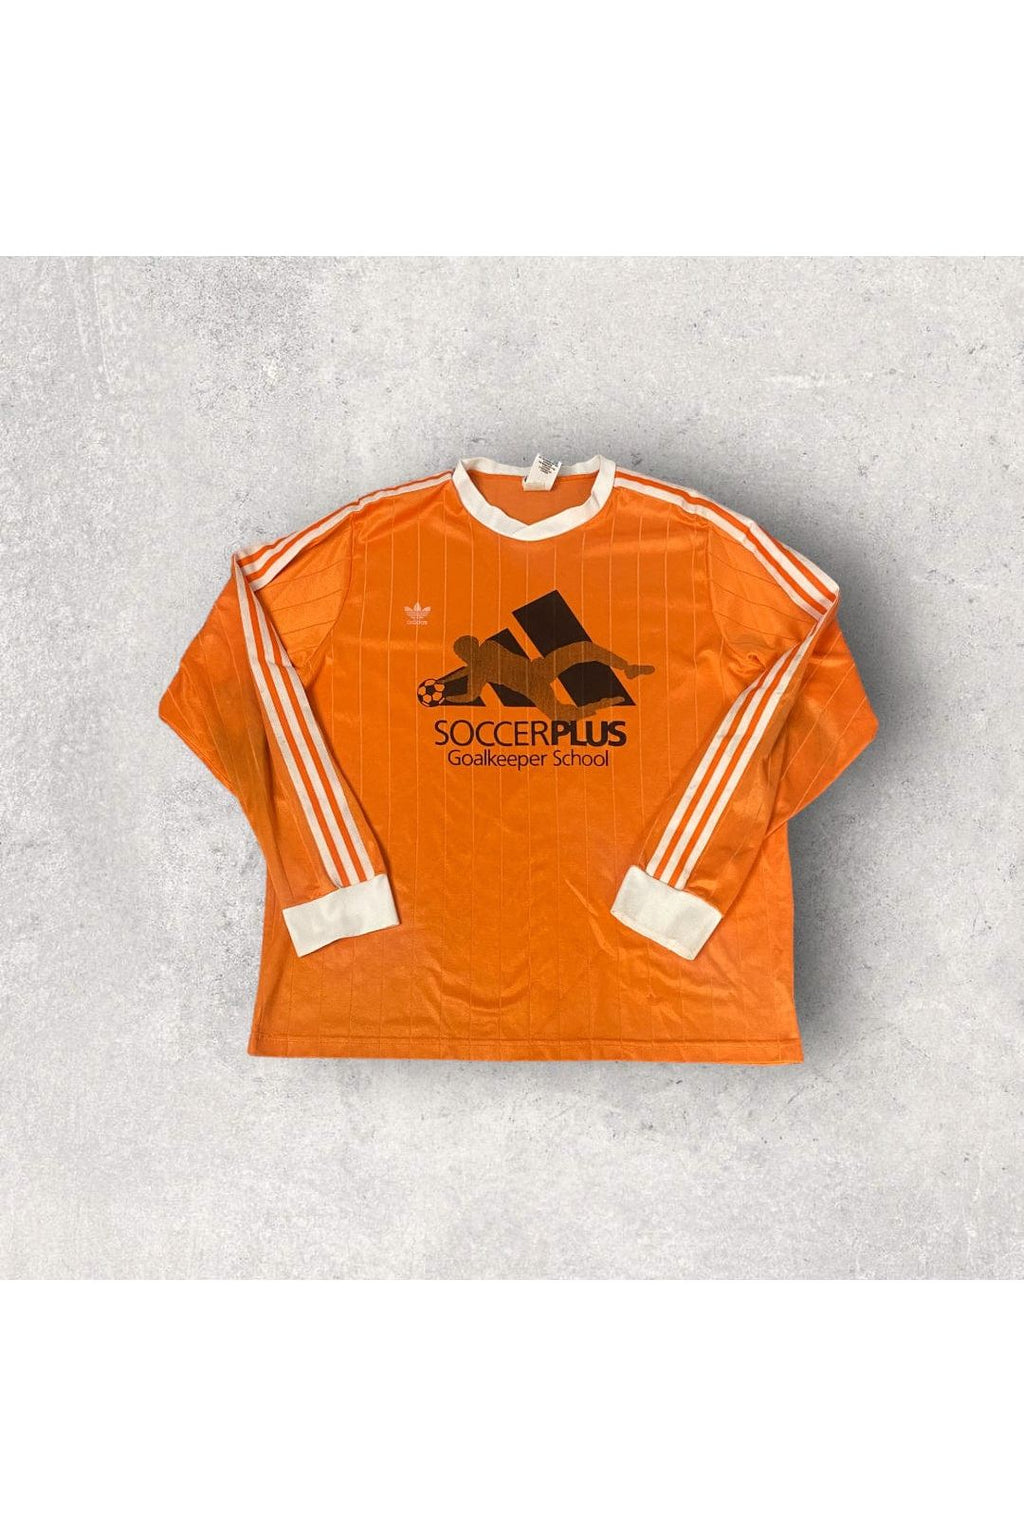 Vintage Adidas Made In USA Soccer Plus Goal Keeper School Soccer Jersey- XL